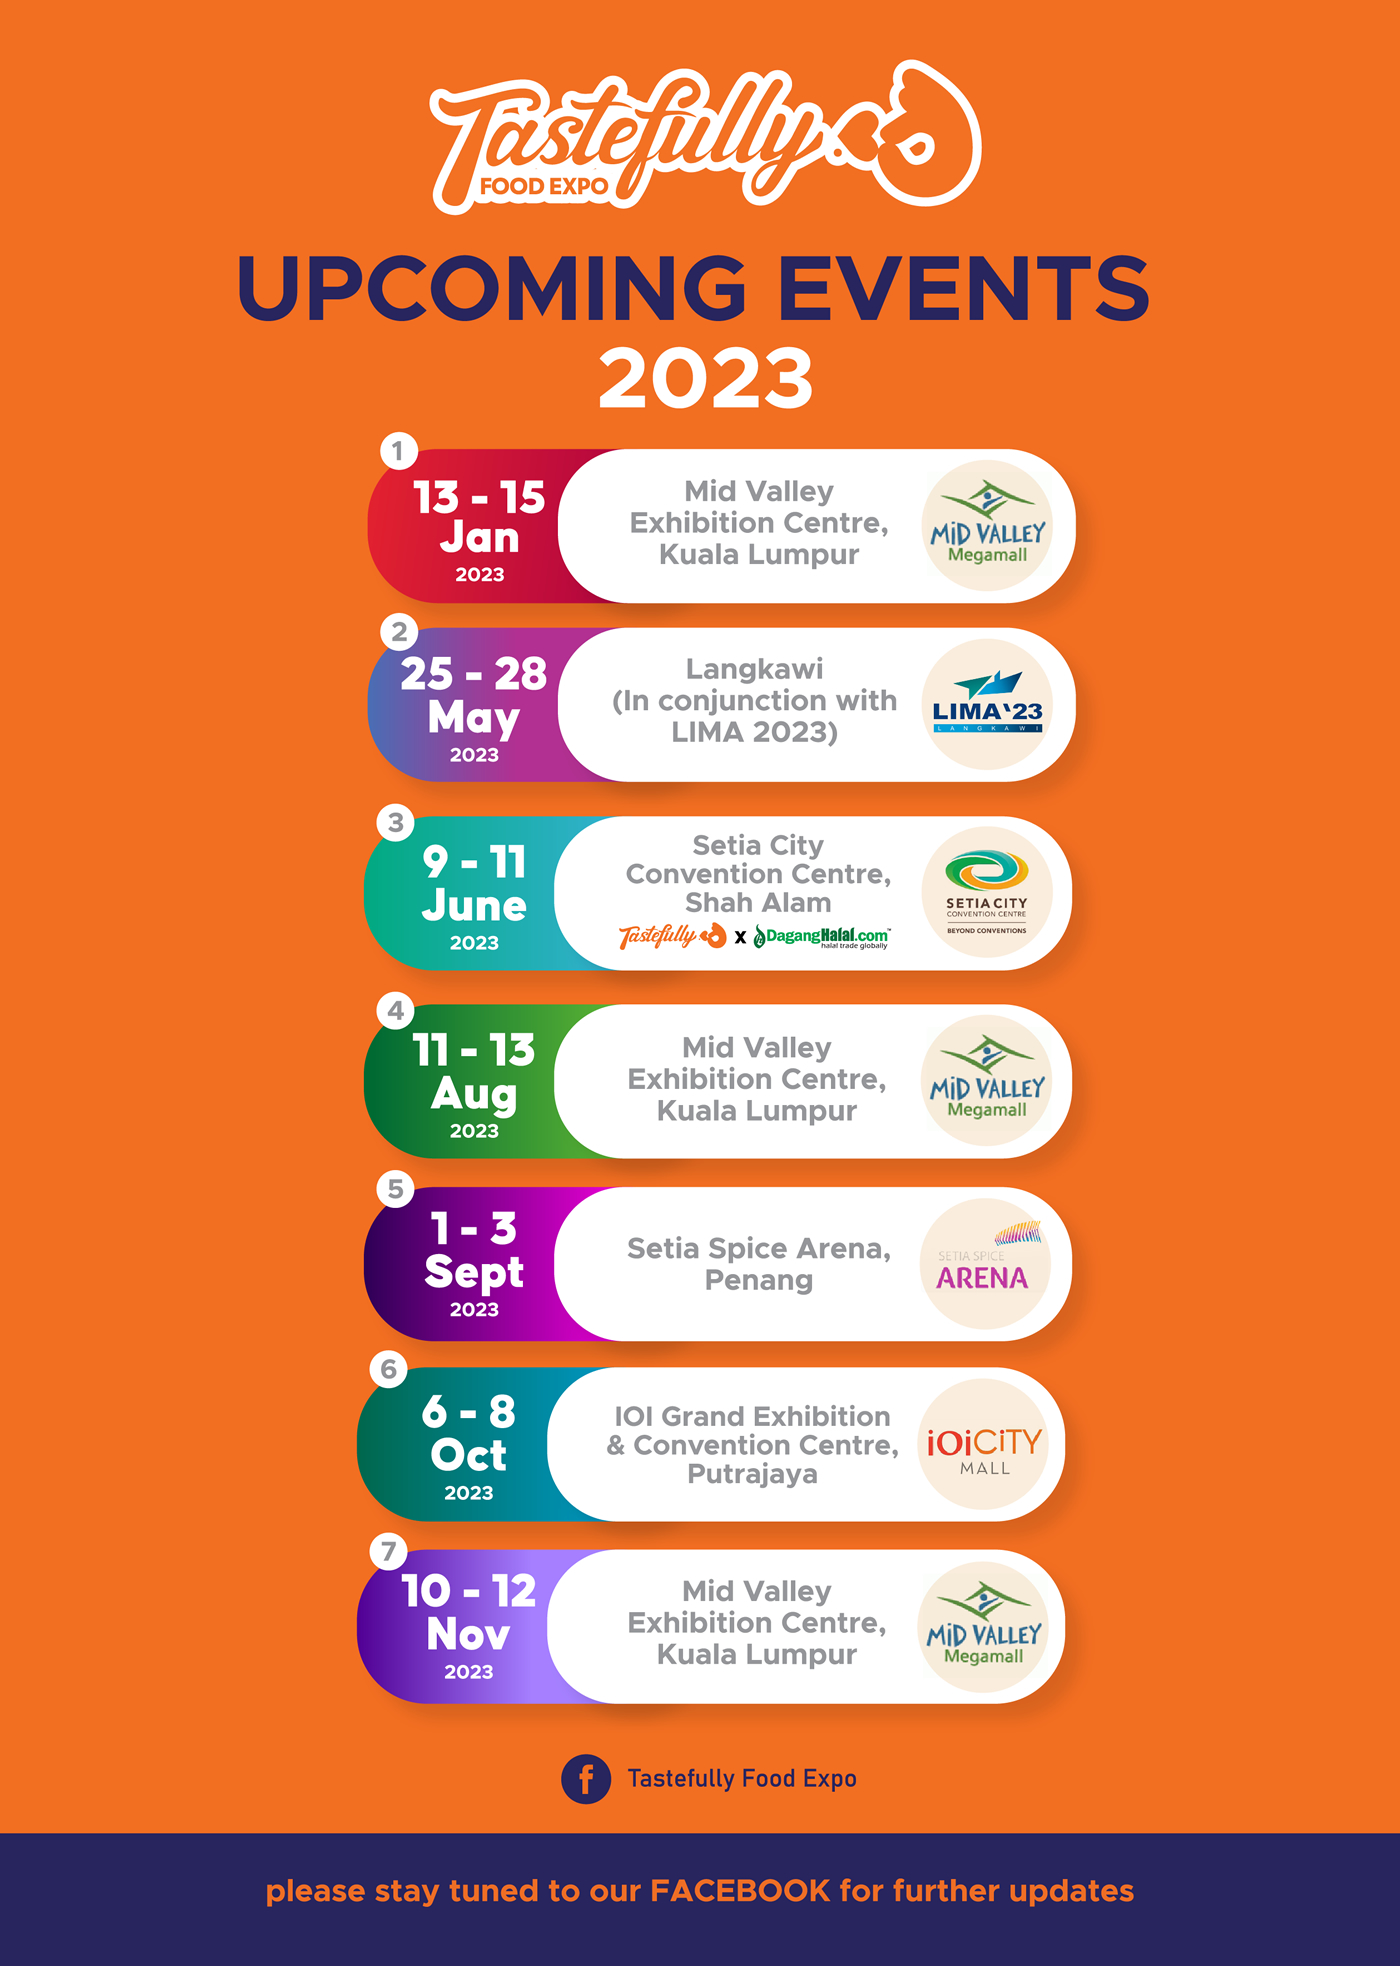 Tastefully Upcoming Events 2023